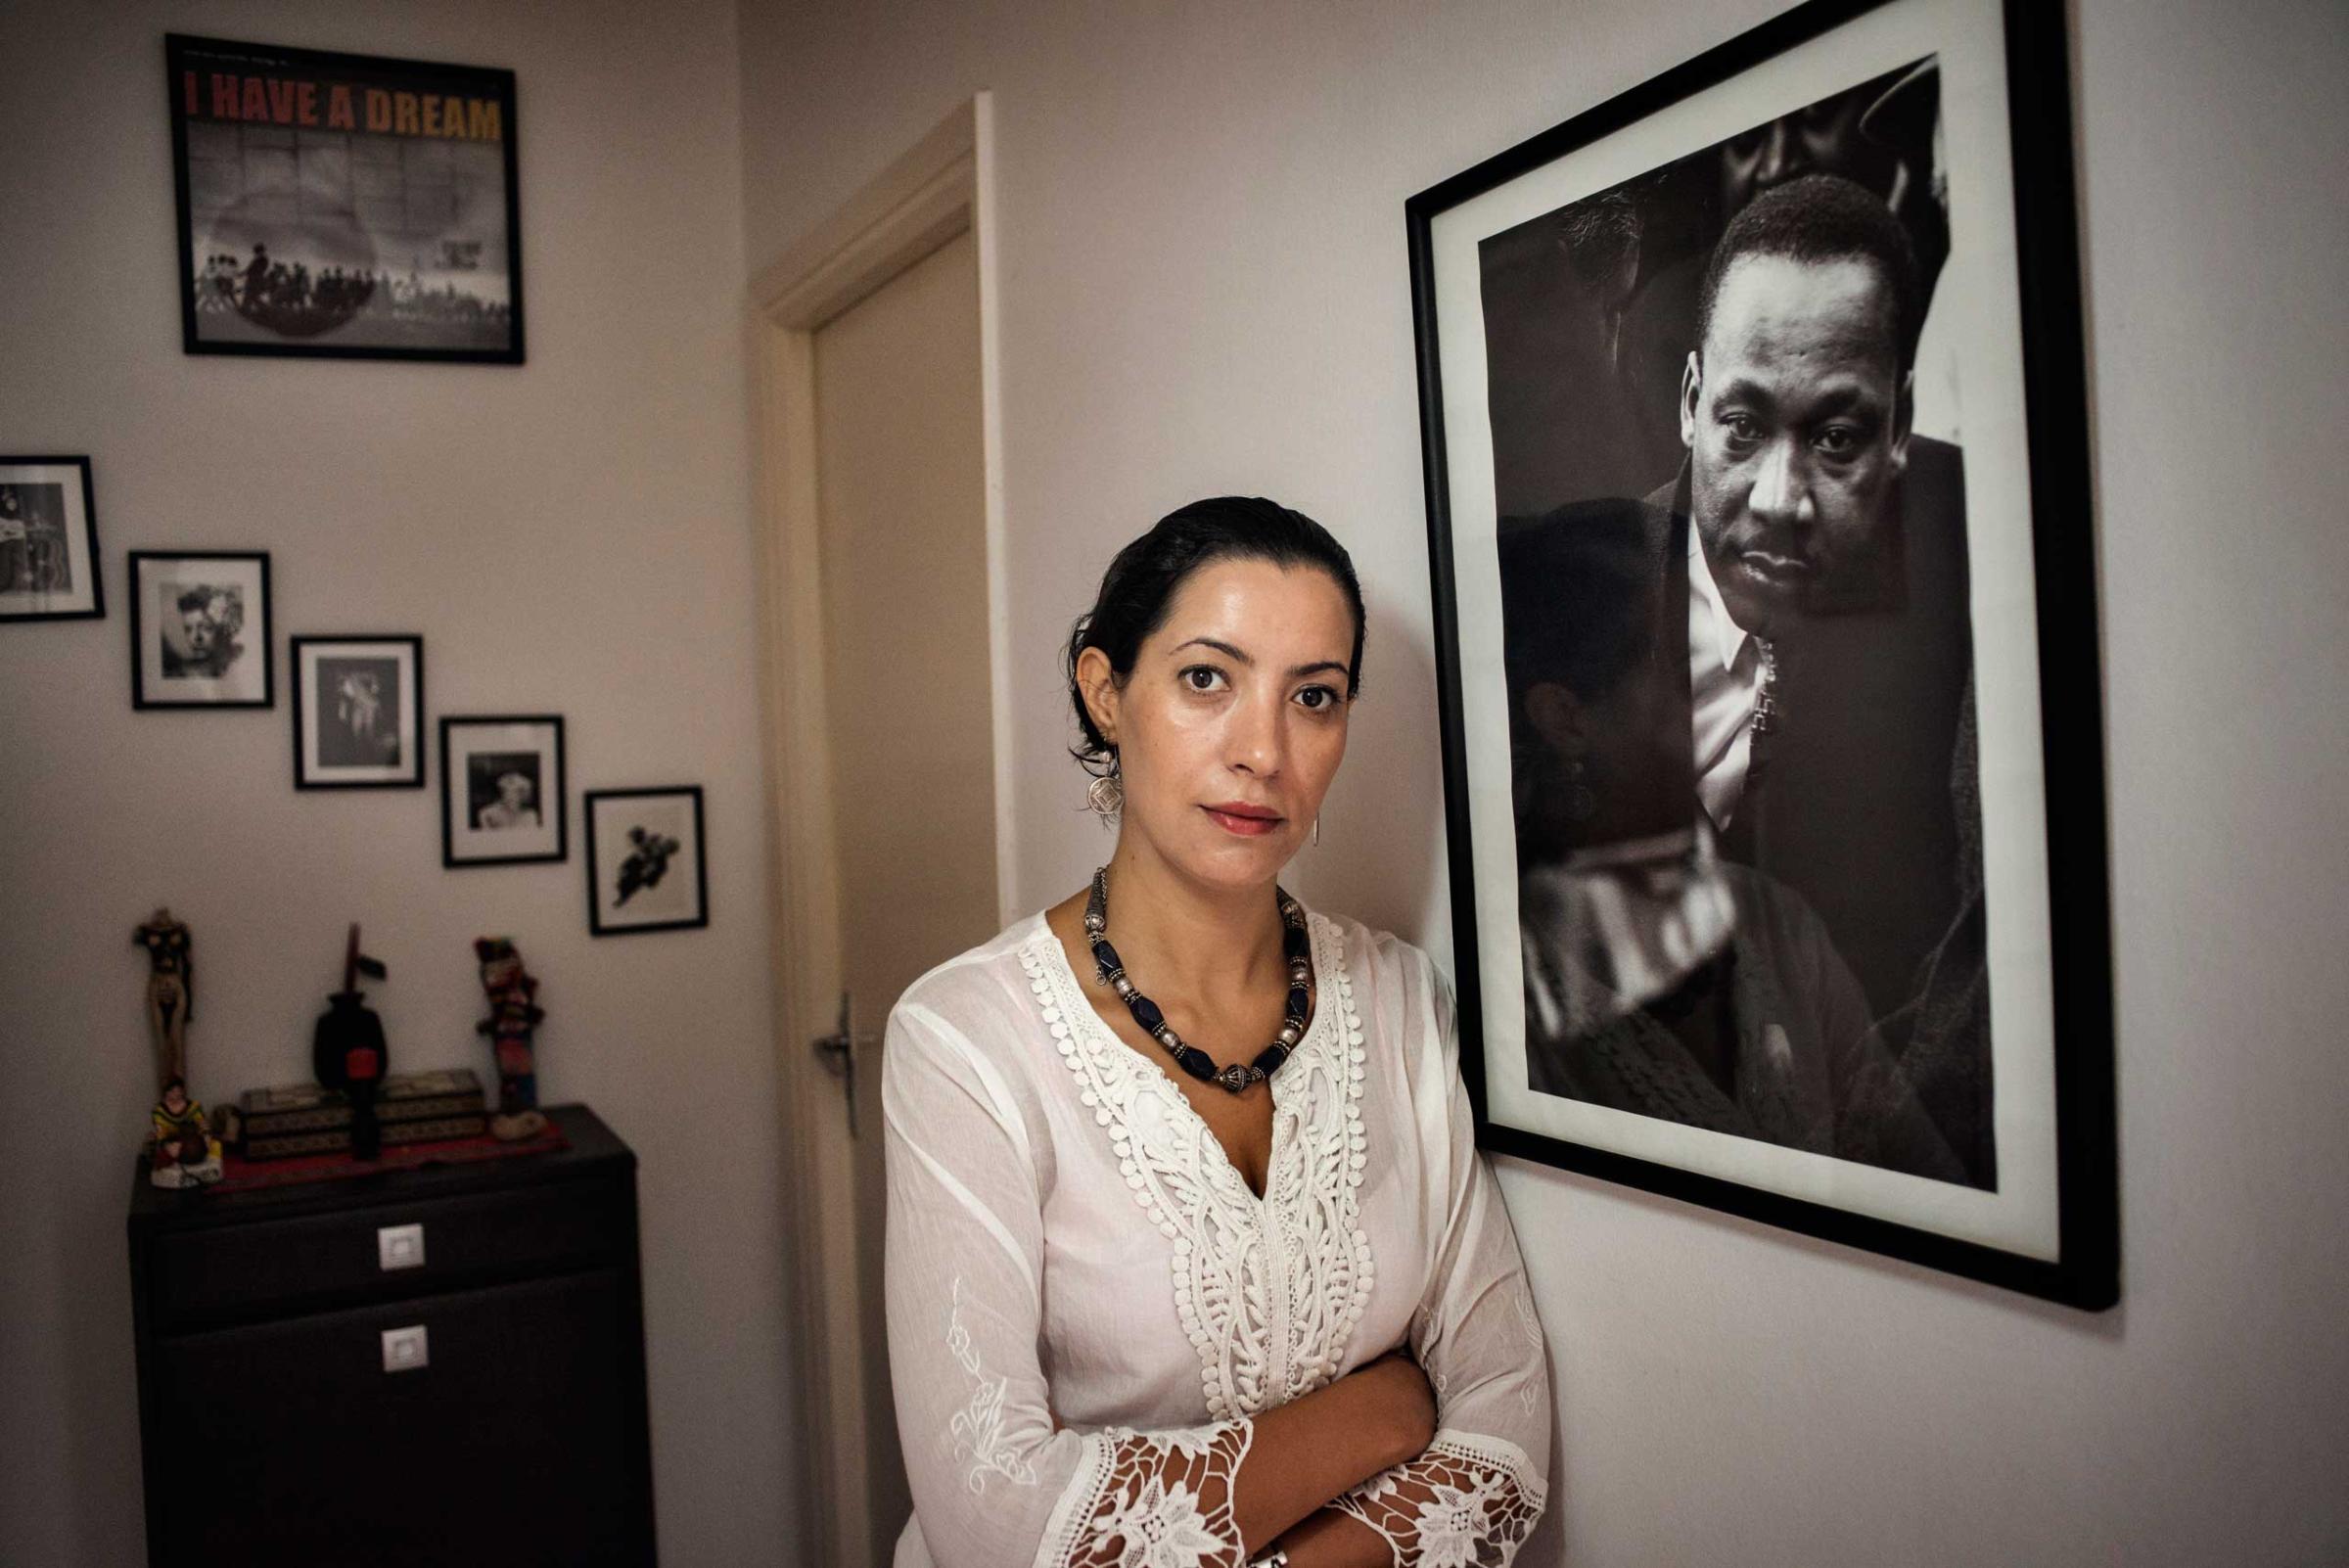 Tunisian woman's right's activist Ikram Ben Said at her home in Tunis, Tunisia on Aug. 18, 2014.